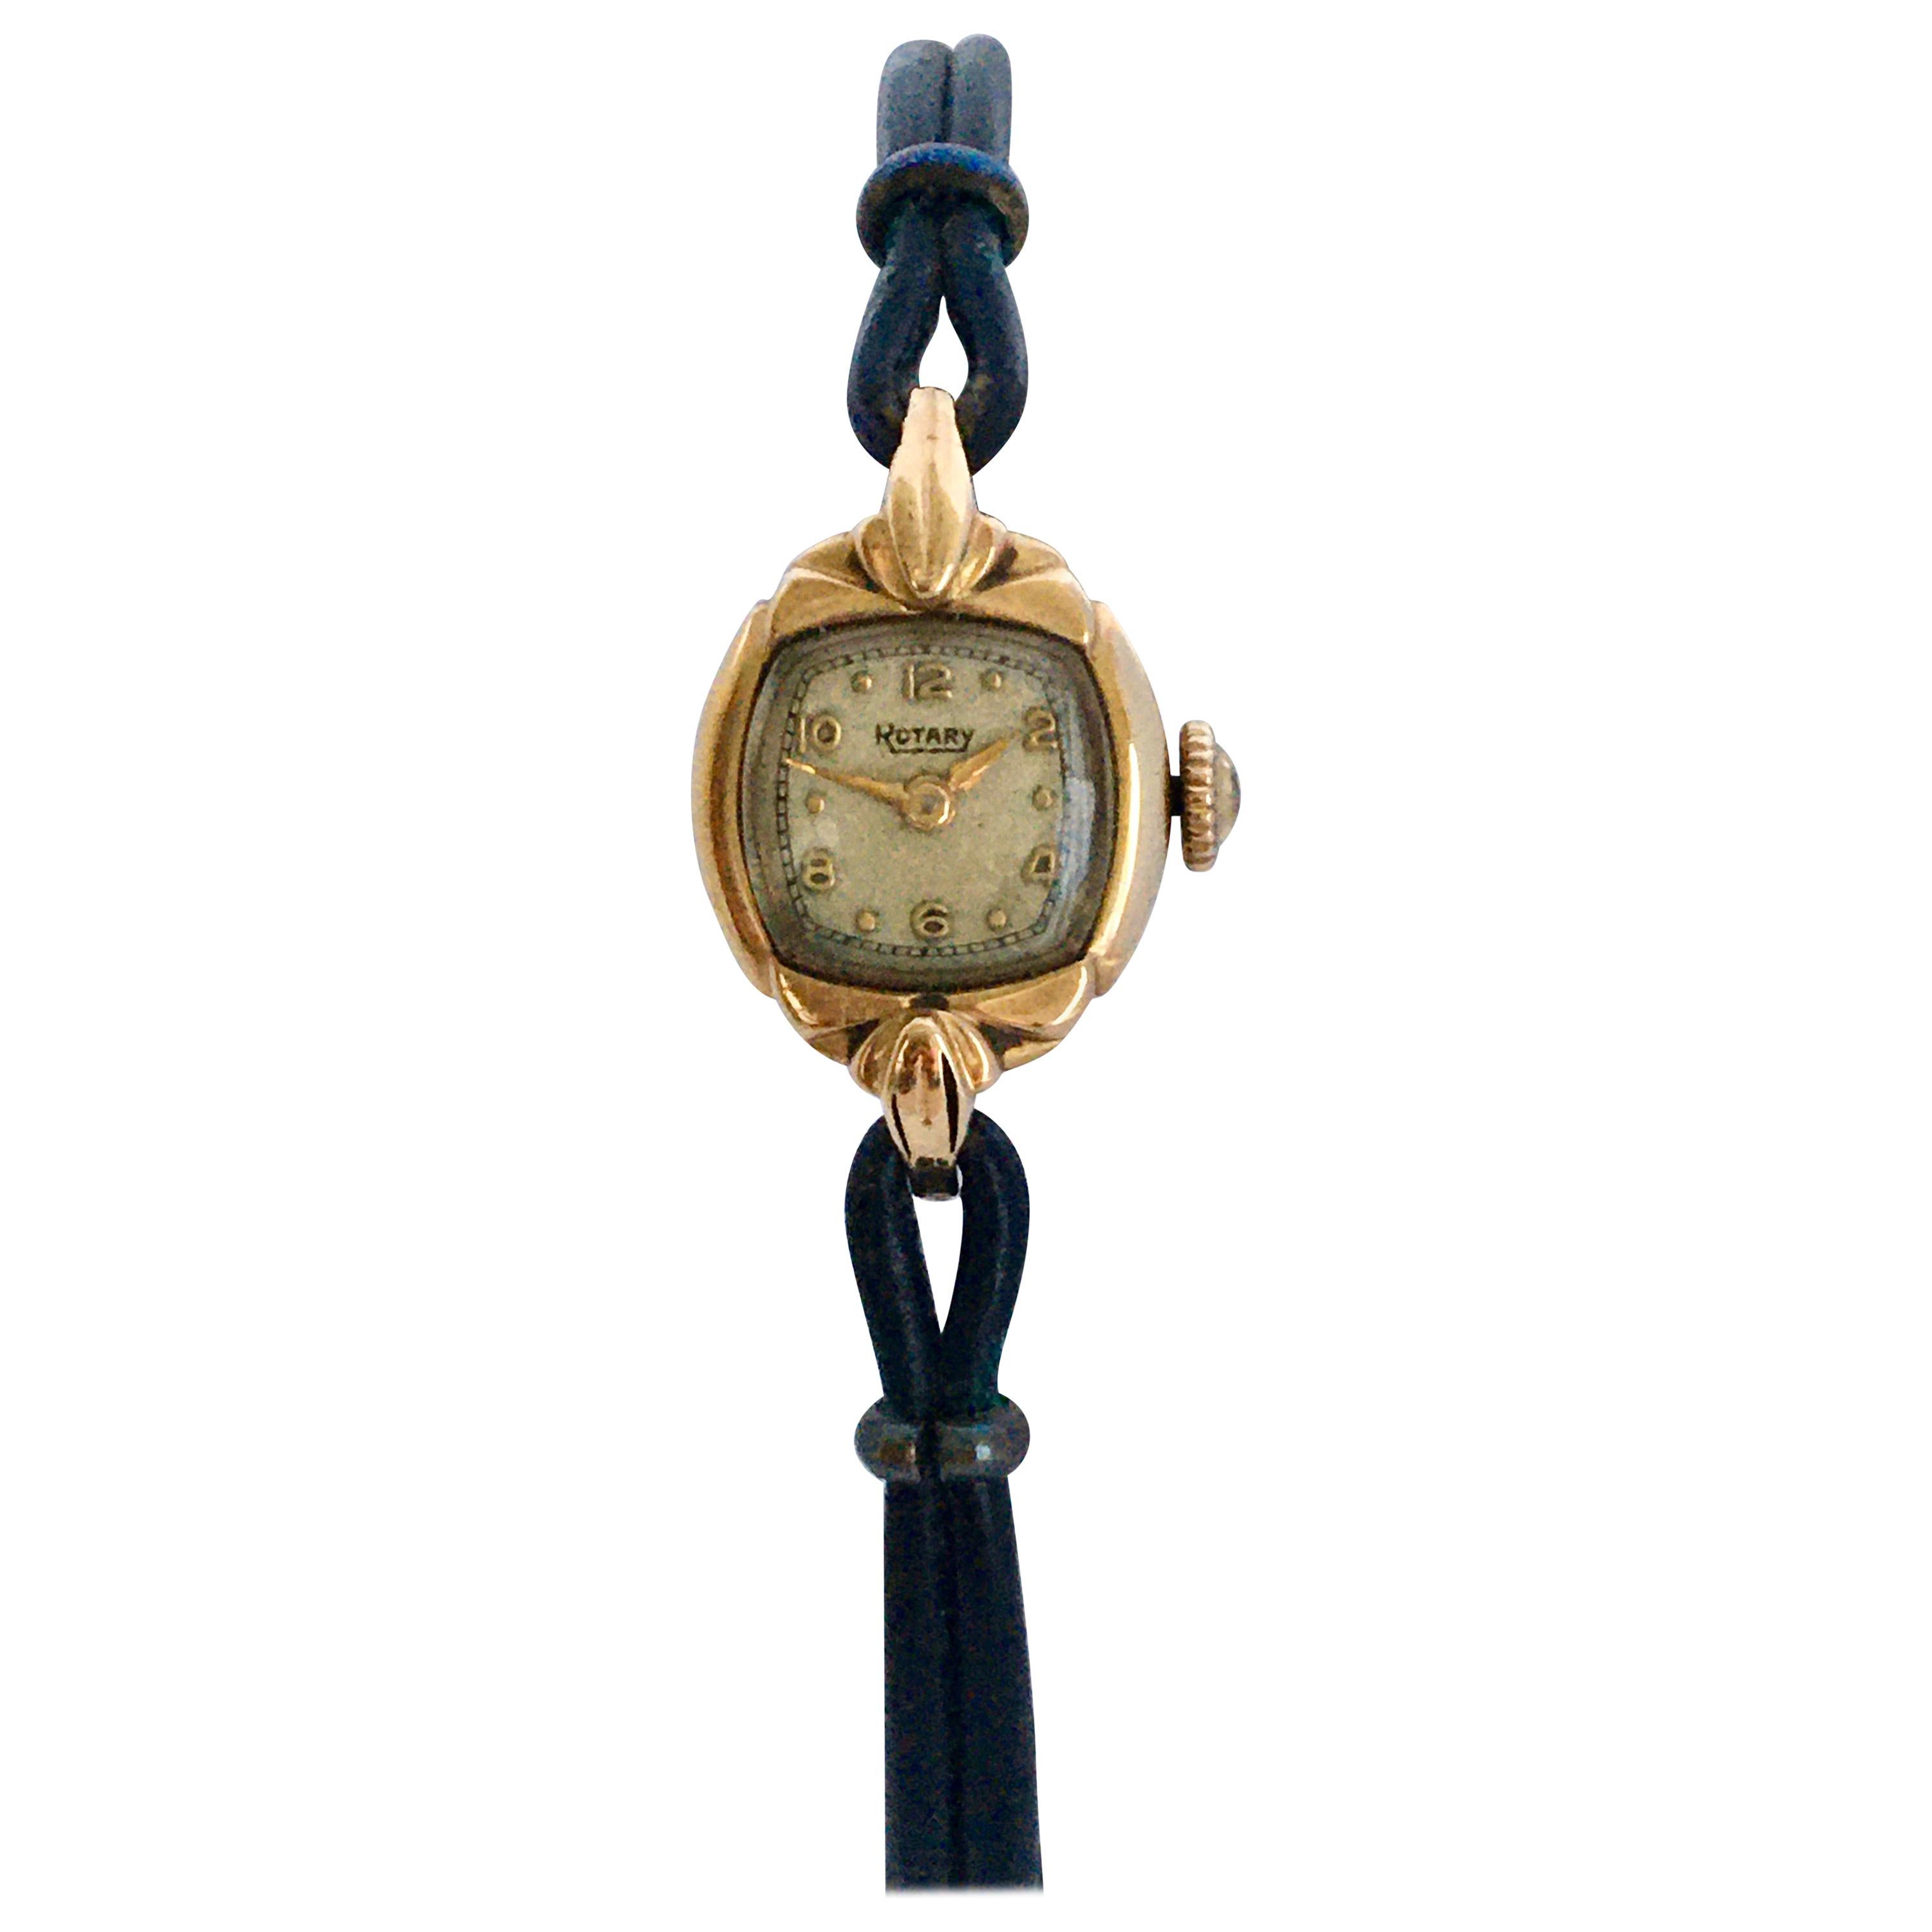 This beautiful petite vintage mechanical gold watch is in good working condition and it keeps a good time. Visible signs of ageing and wear as shown. The black leather knitted strap is a bit worn but still wearable. 

Please study the images